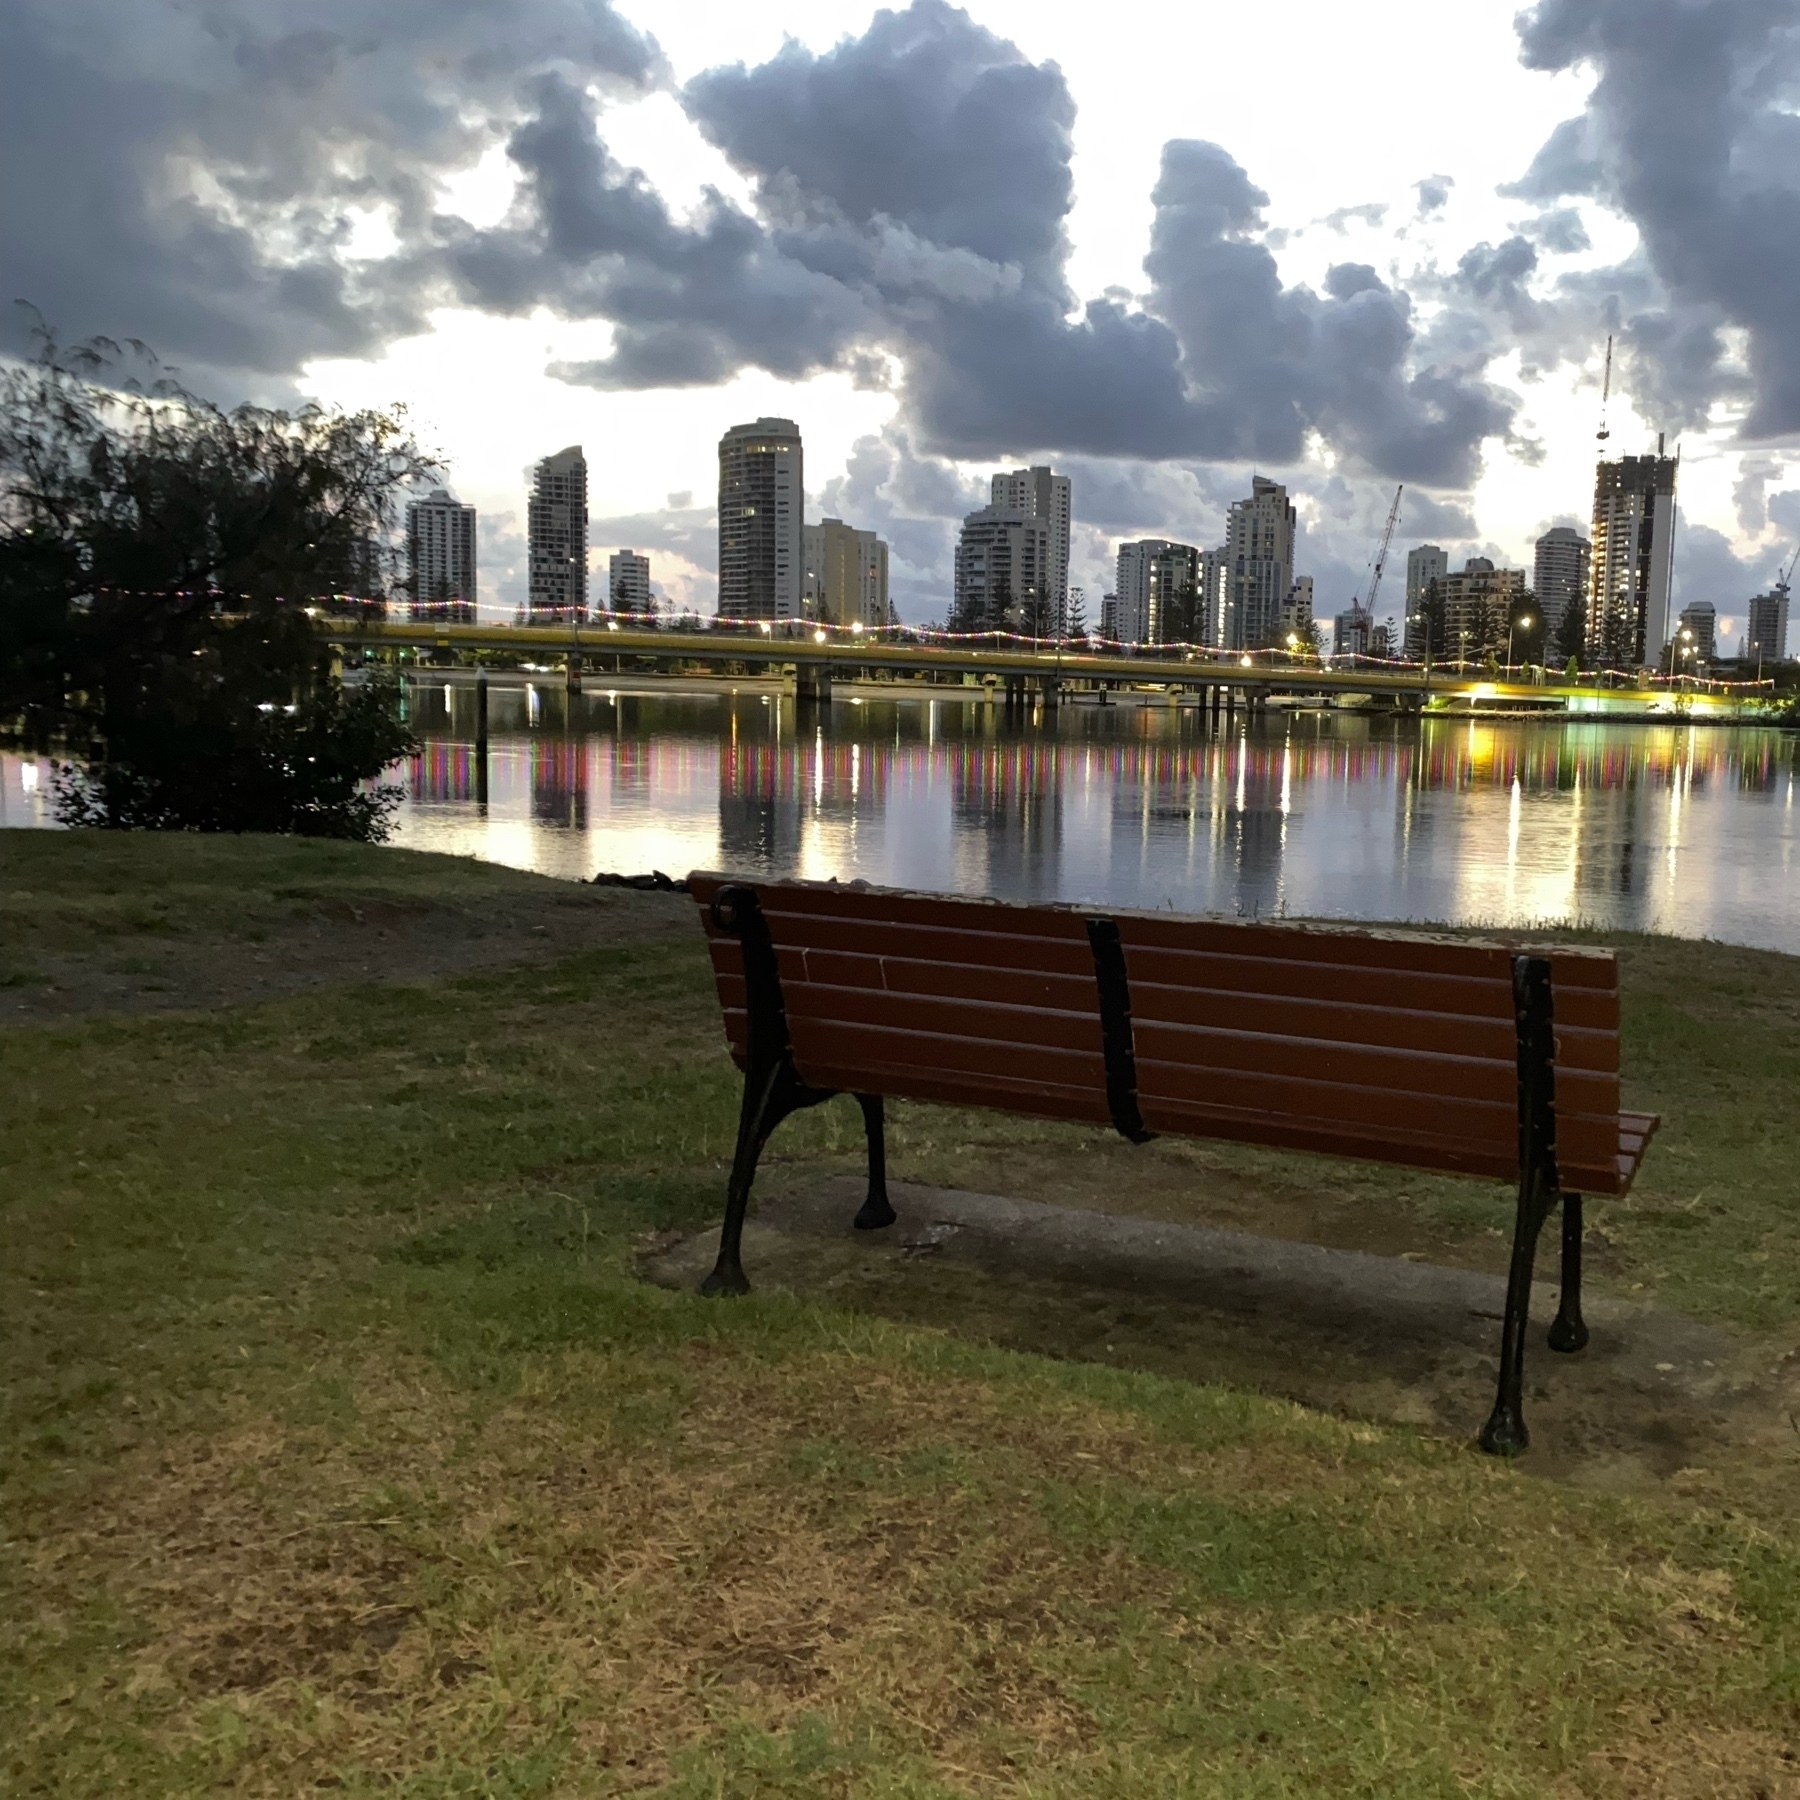 early morning photo of a park bench looking out over a river with nice cloud formations. 